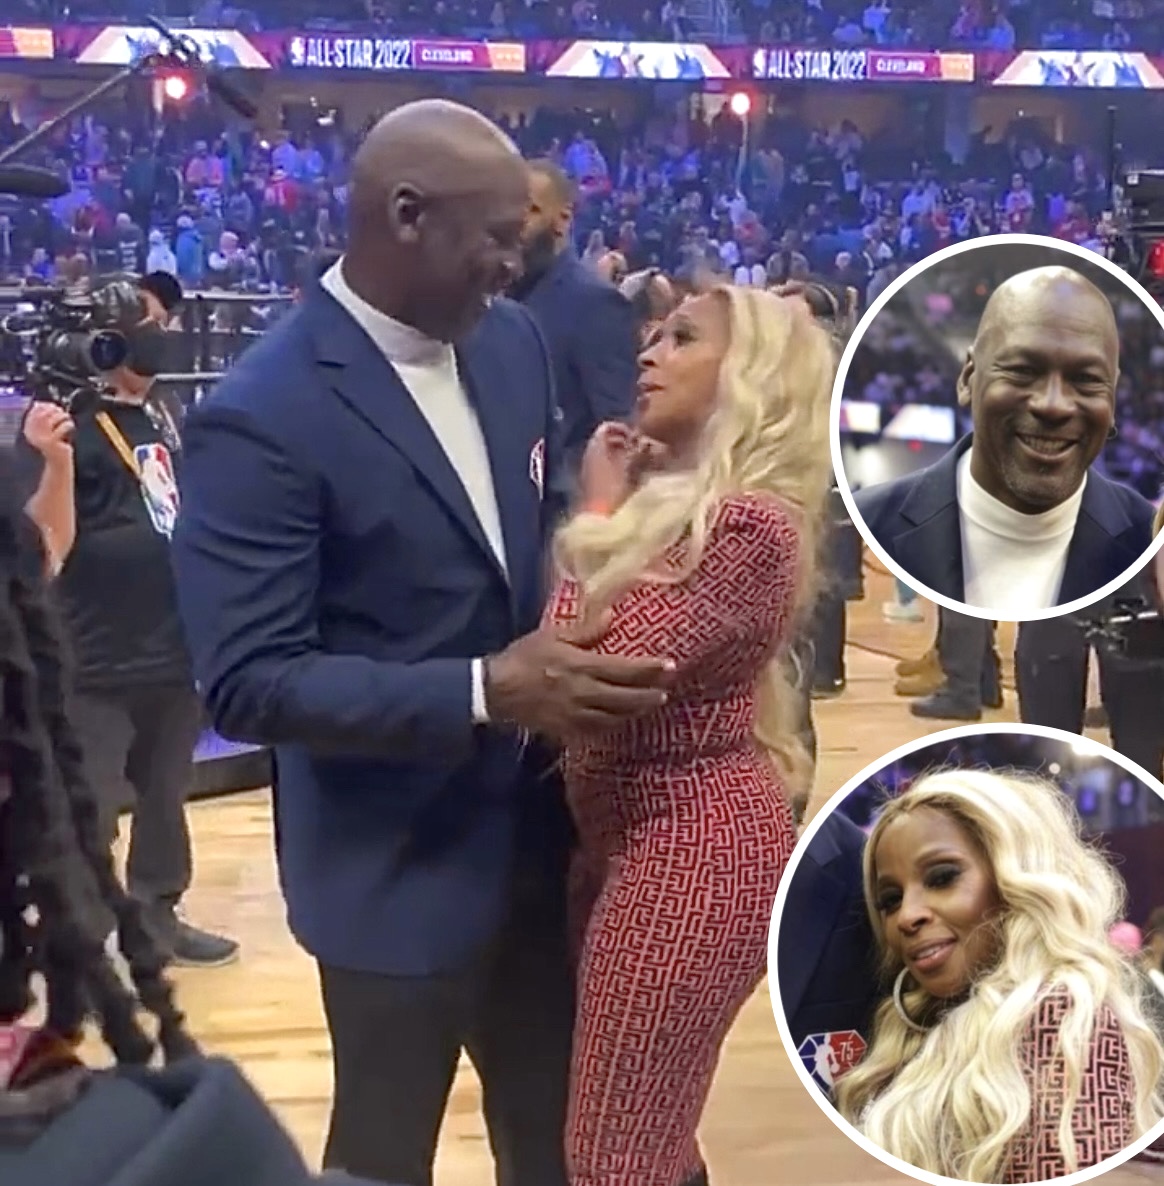 Obligatorio colorante adolescentes Michael Jordan Seemingly Taps Mary J Blige's Butt While They Embrace At The  NBA All Star Game - theJasmineBRAND